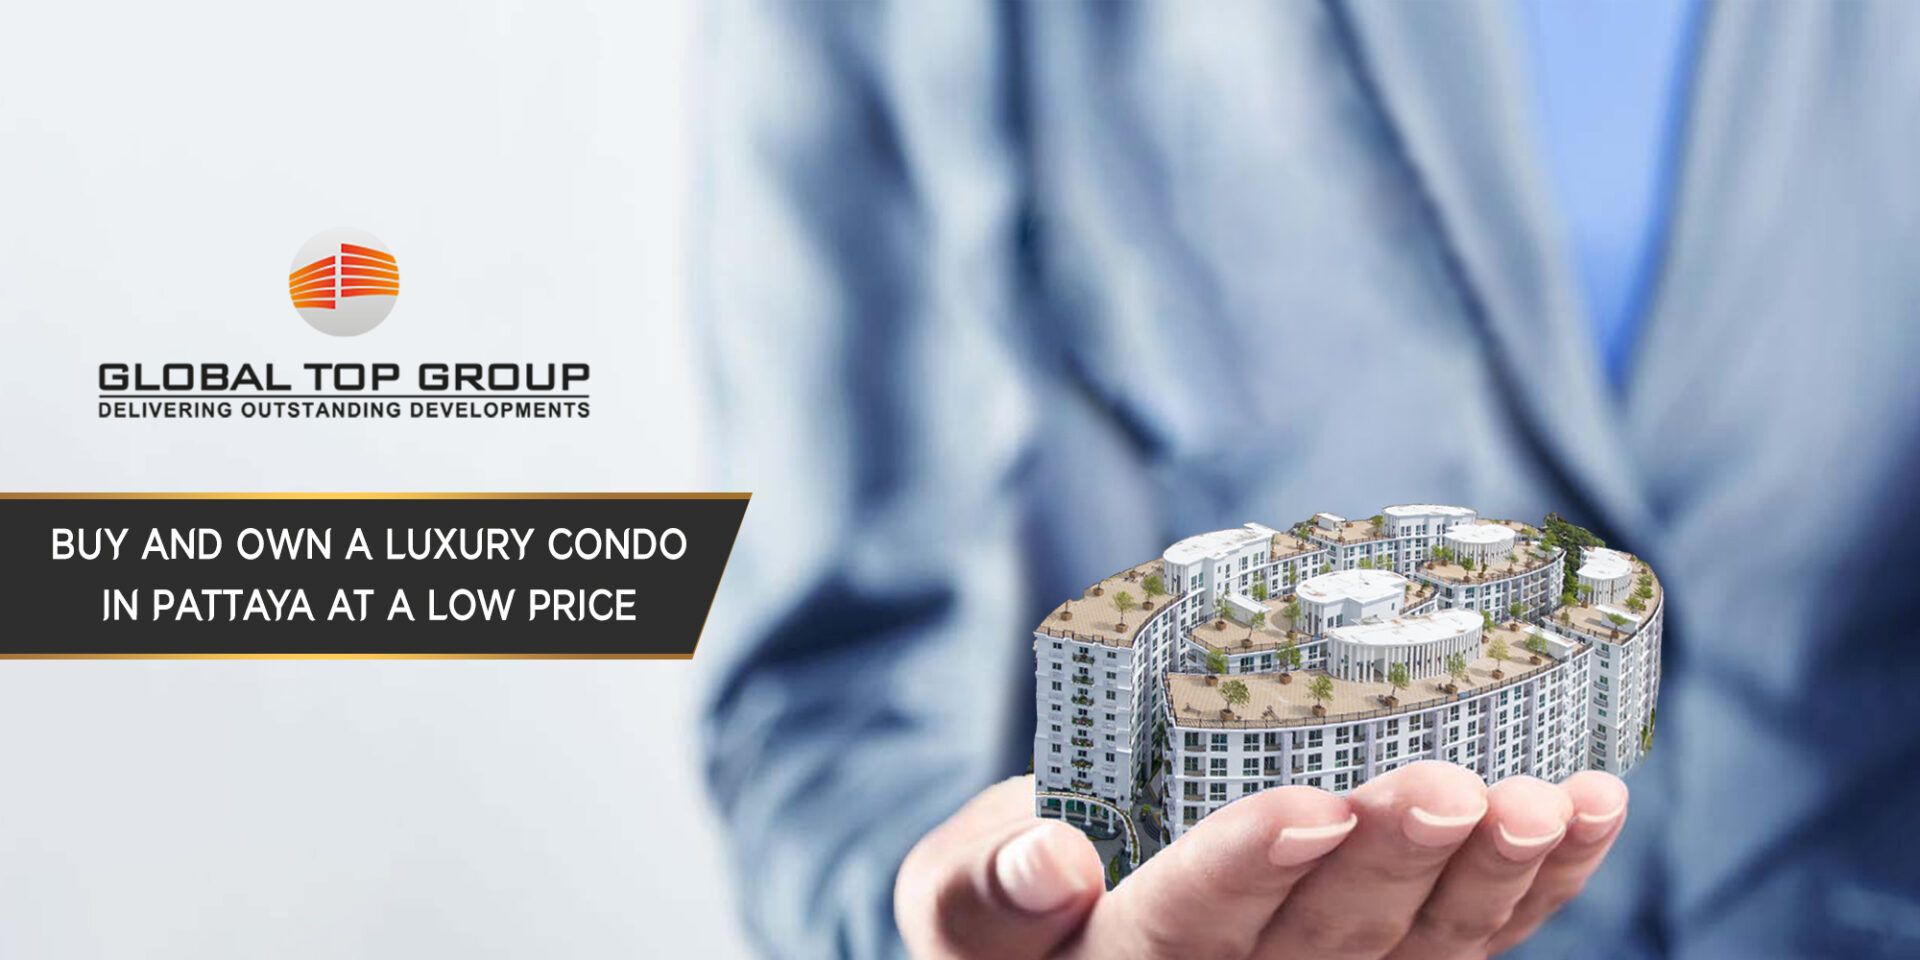 Blog Global Top Group Website Buy and Own A Luxury Condo in Pattaya at a Low Price 01